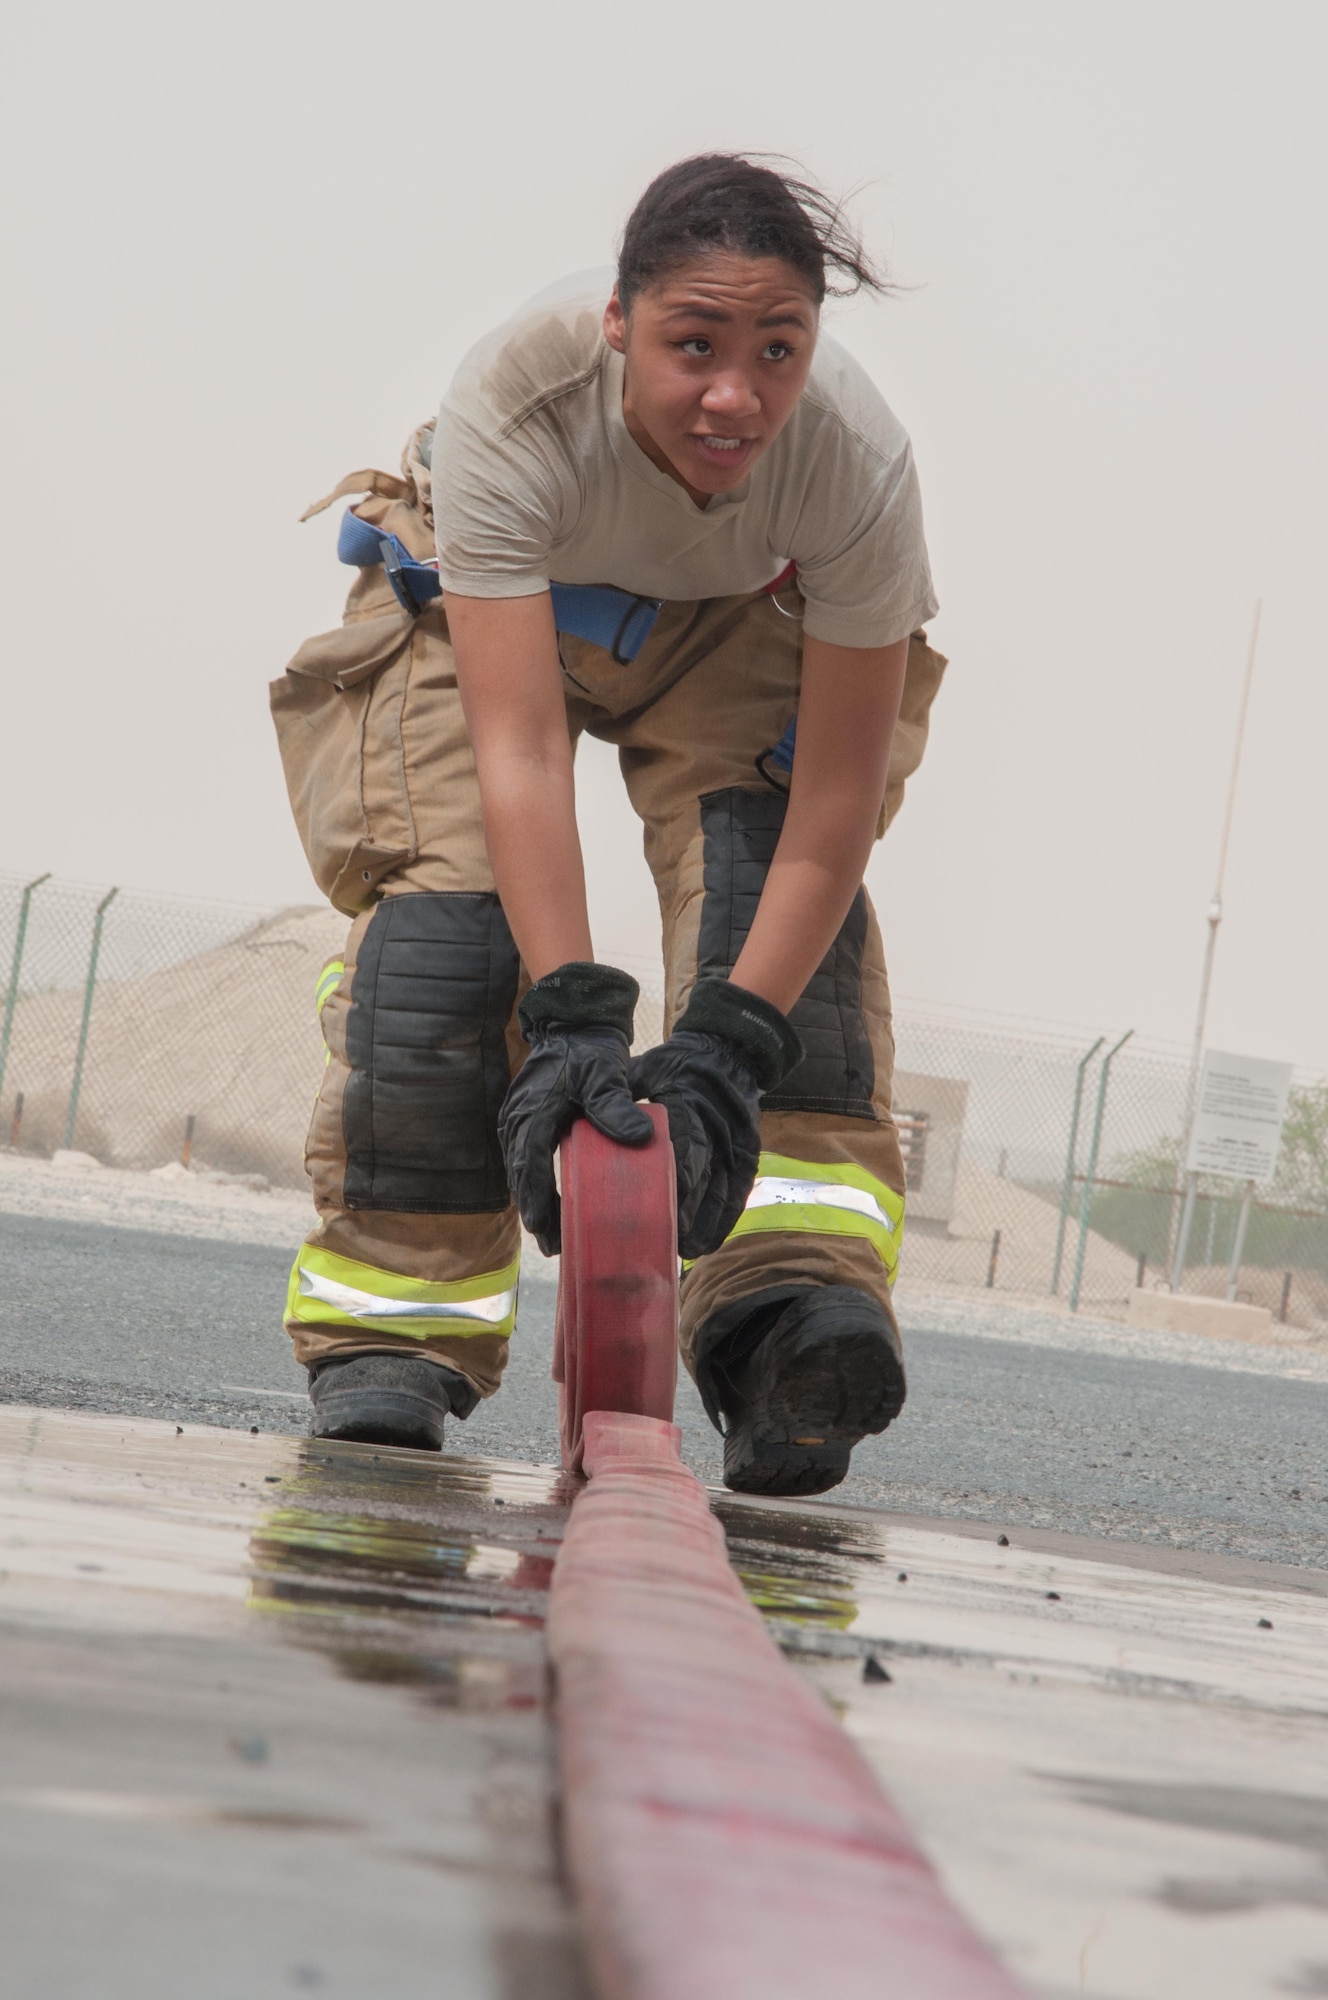 Senior Airman Ayanna Gaskin, a firefighter assigned to the 386th Civil Engineer Squadron, rolls a fire hose prior to storage  in the fire truck parking area at an undisclosed location in Southwest Asia, June 25, 2017. (U.S. Air Force photo by Master Sgt. Eric M. Sharman)